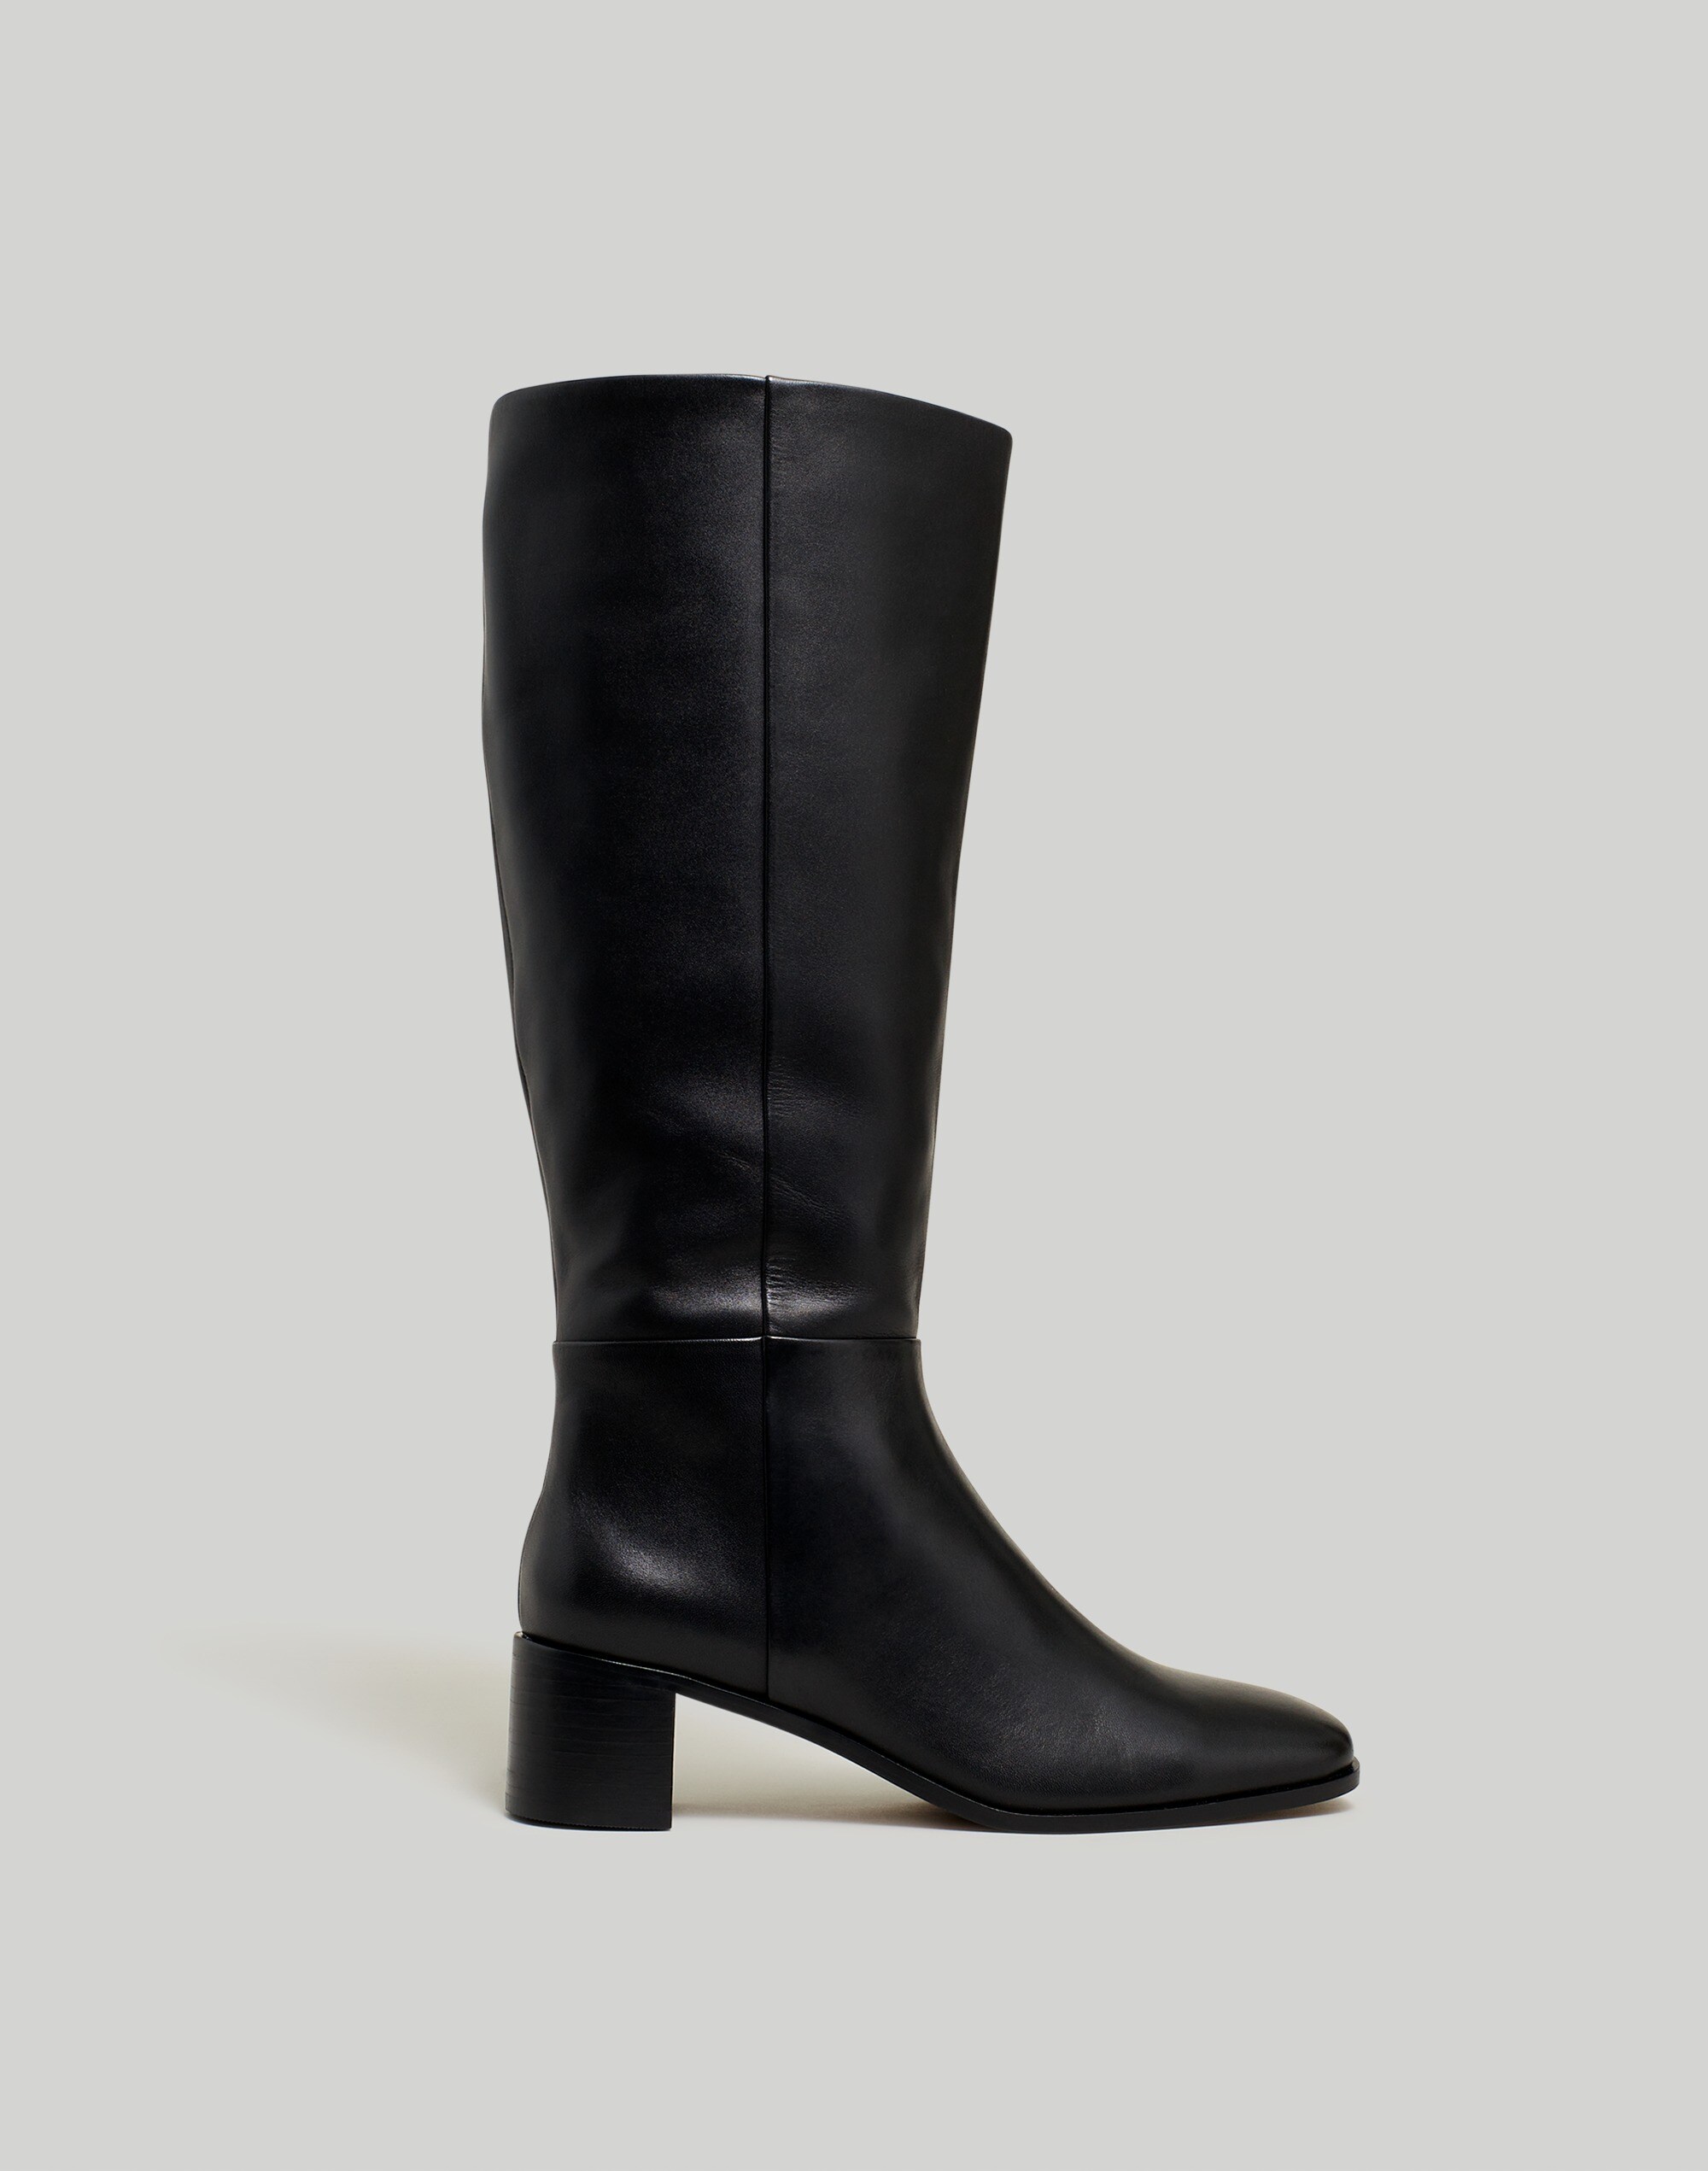 The Monterey Tall Boot Extended Calf